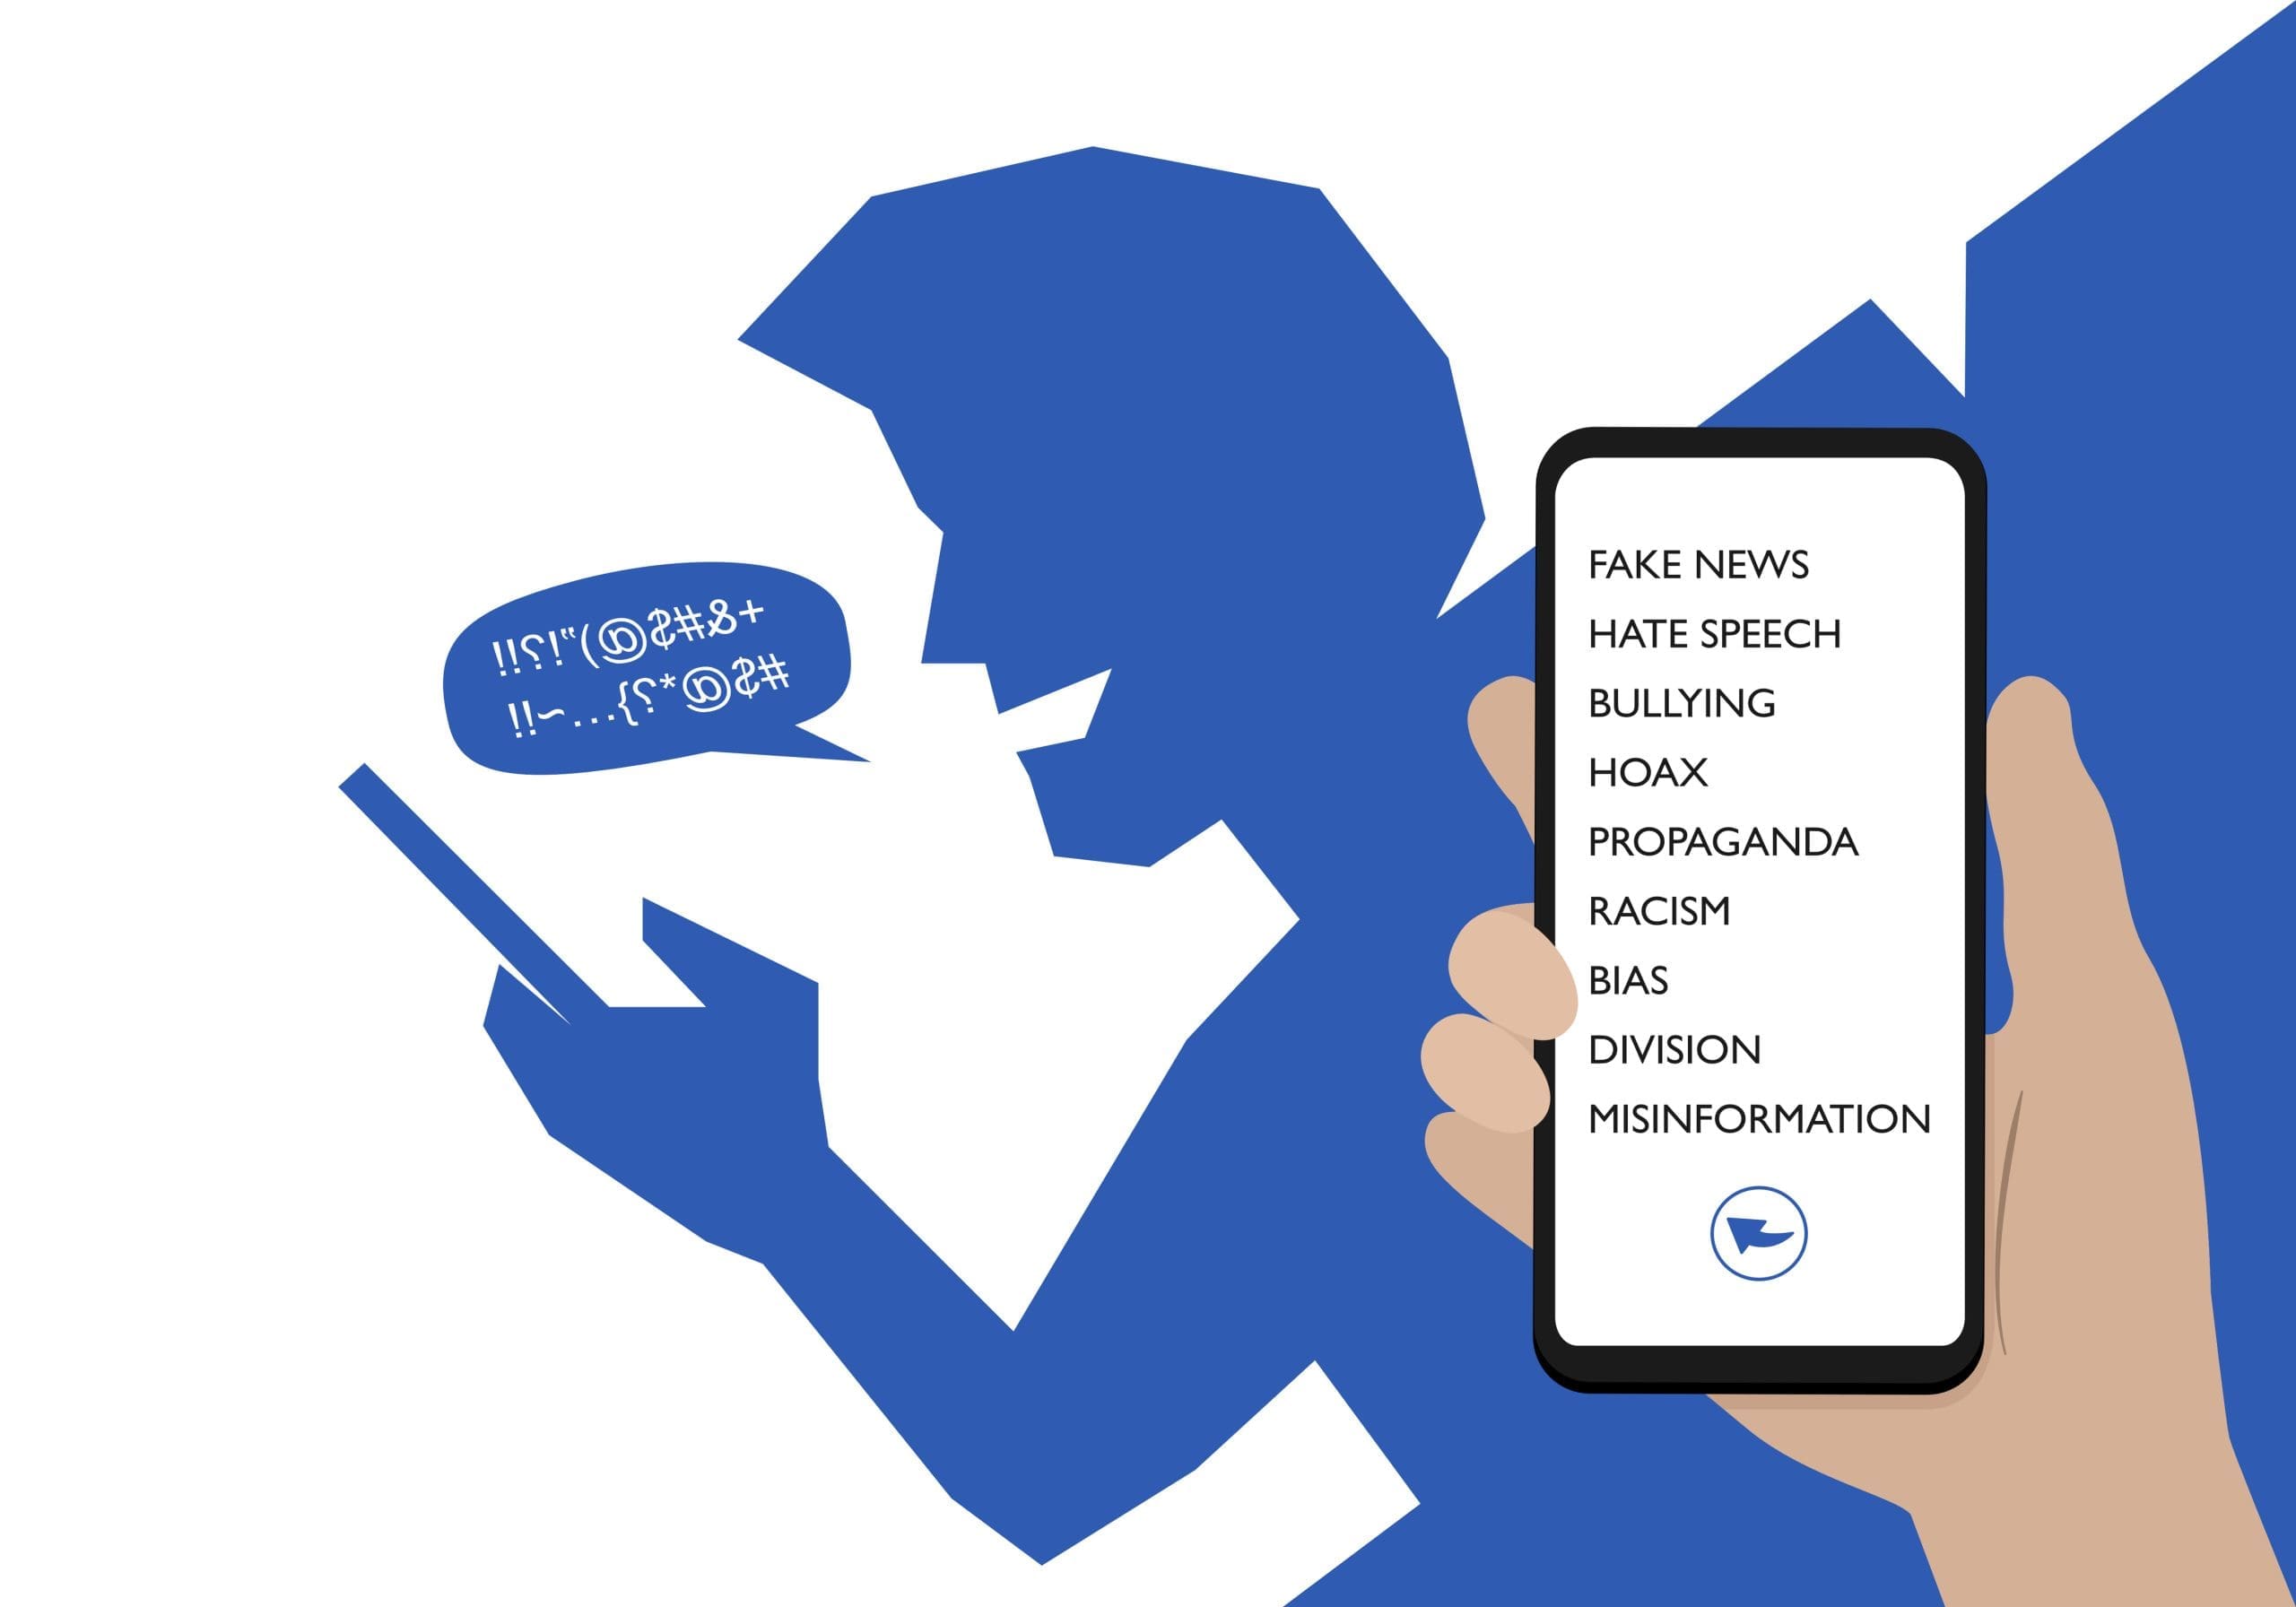 A man is holding up a phone displaying a speech bubble, suggesting potential biased information or negative news.